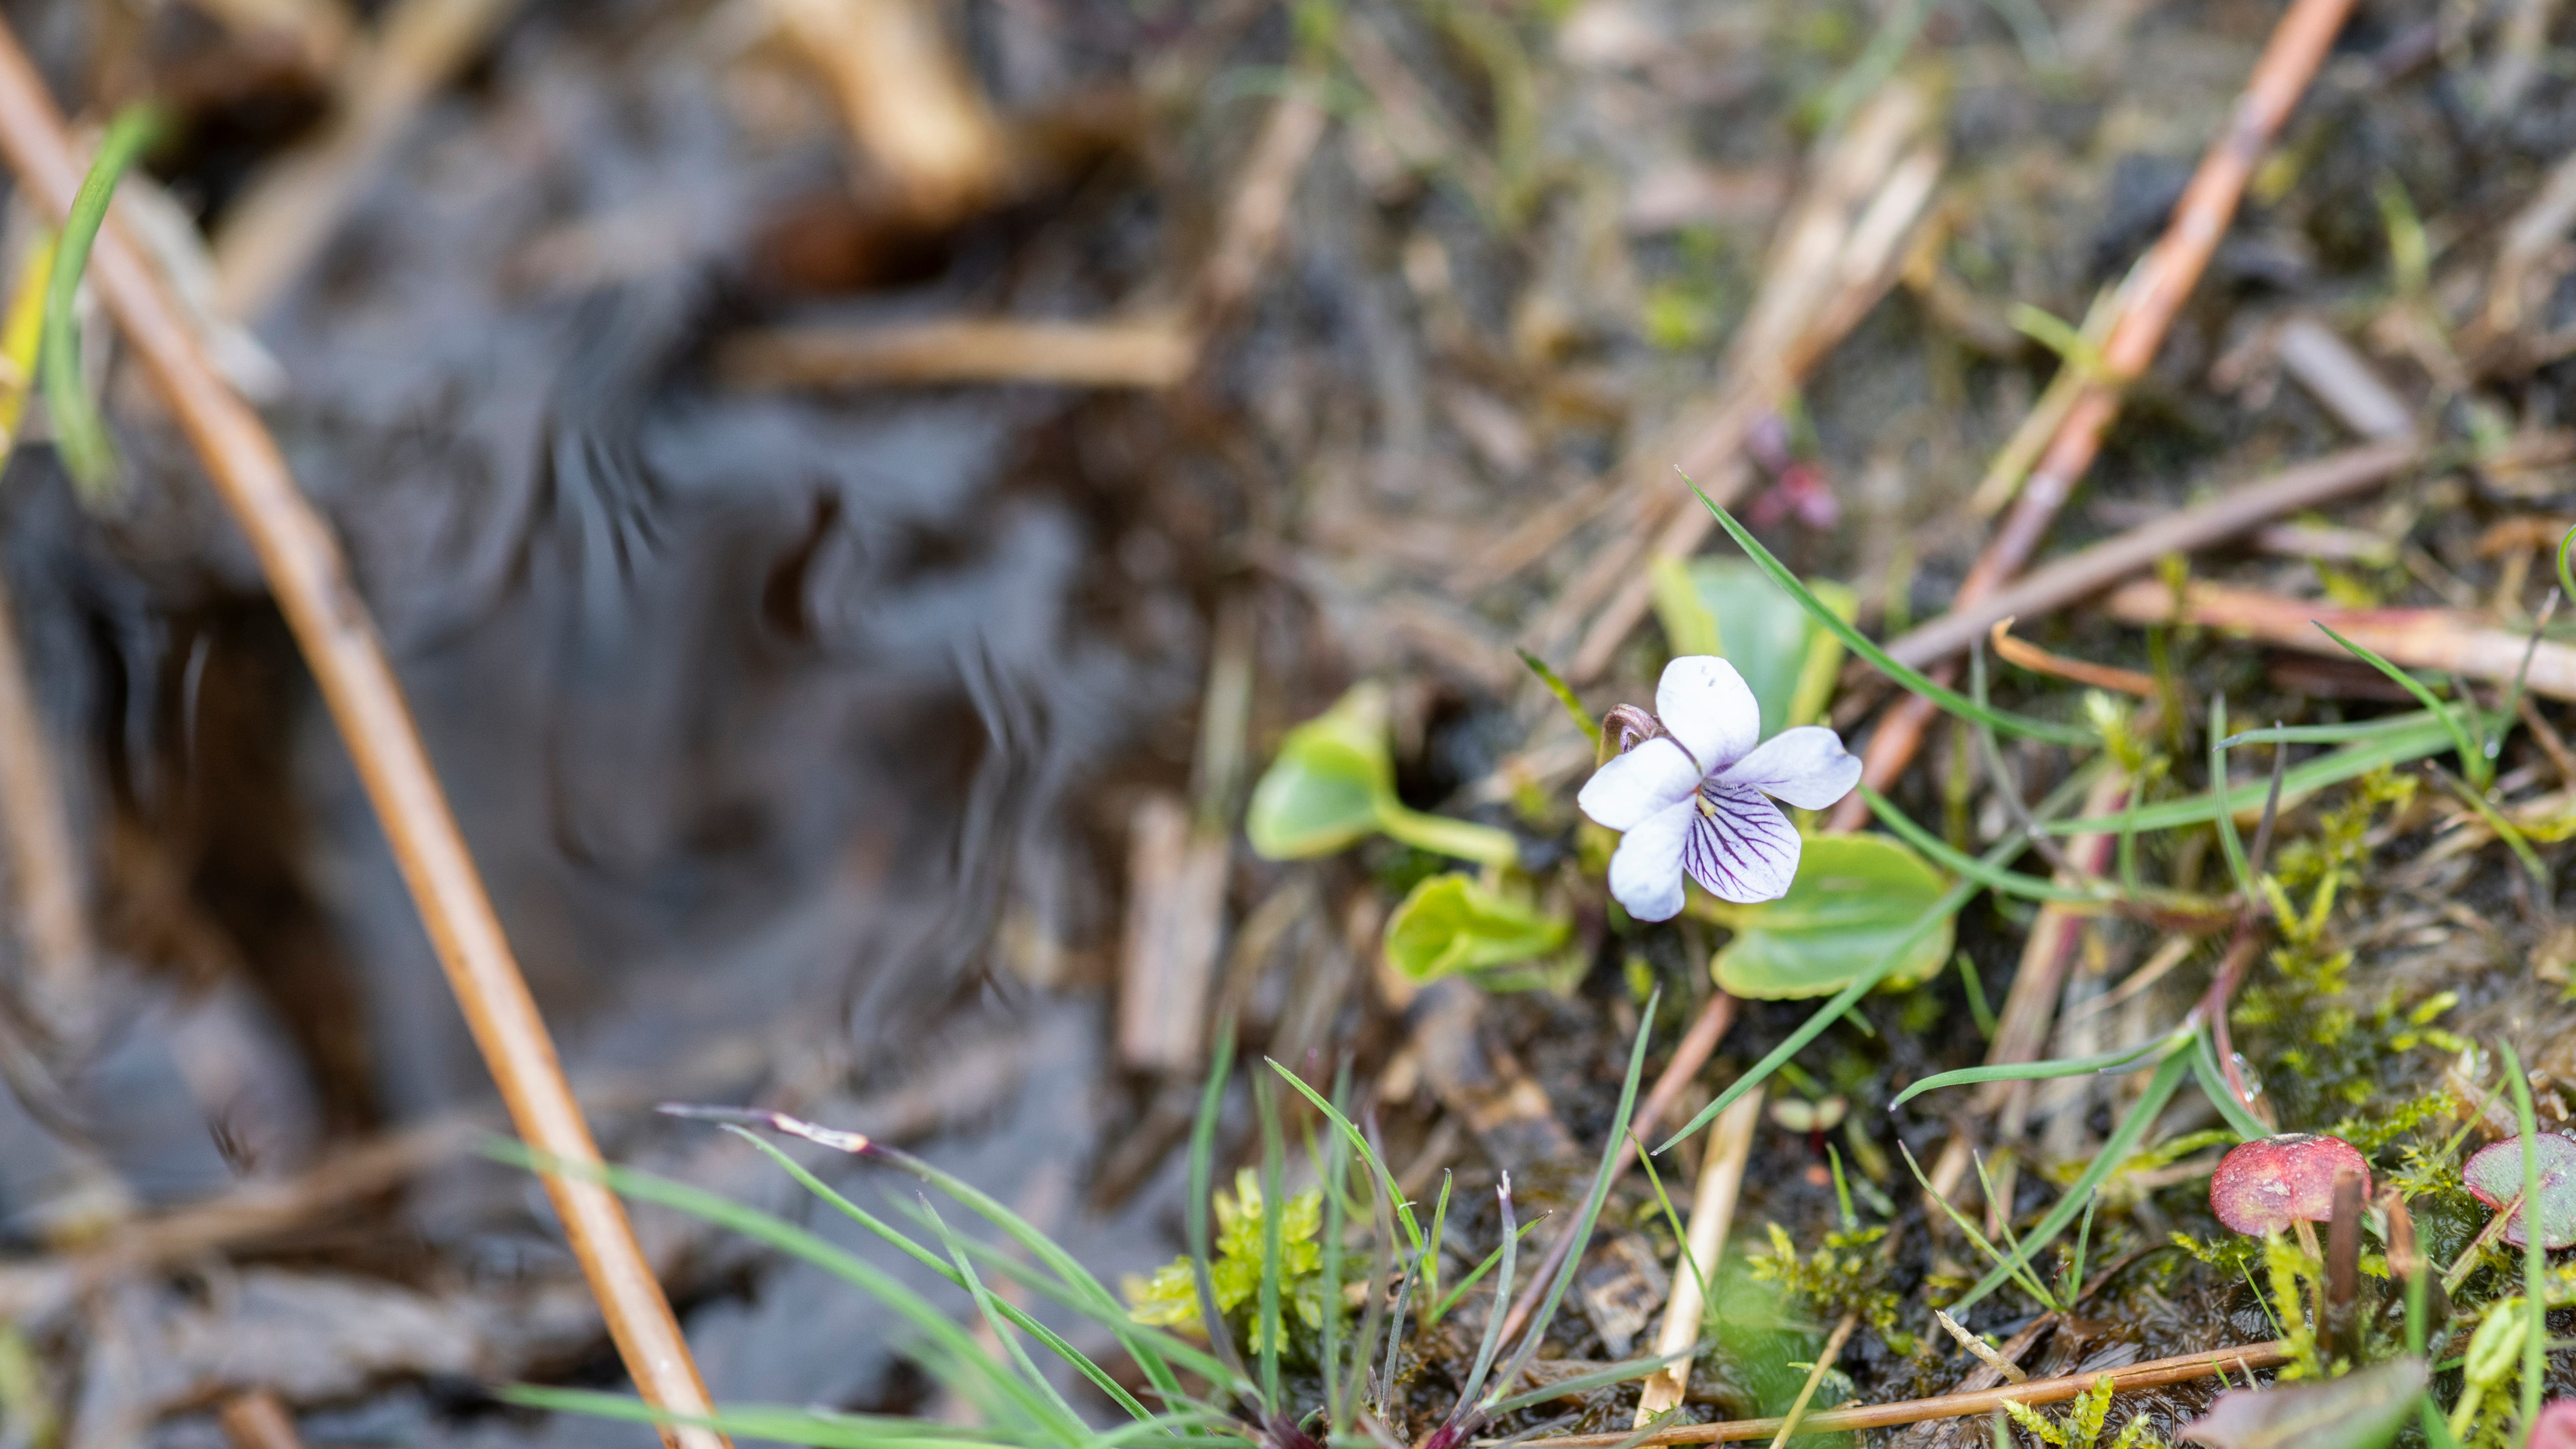 Mass of marsh violets to be planted in Shropshire Hills to boost rare butterfly